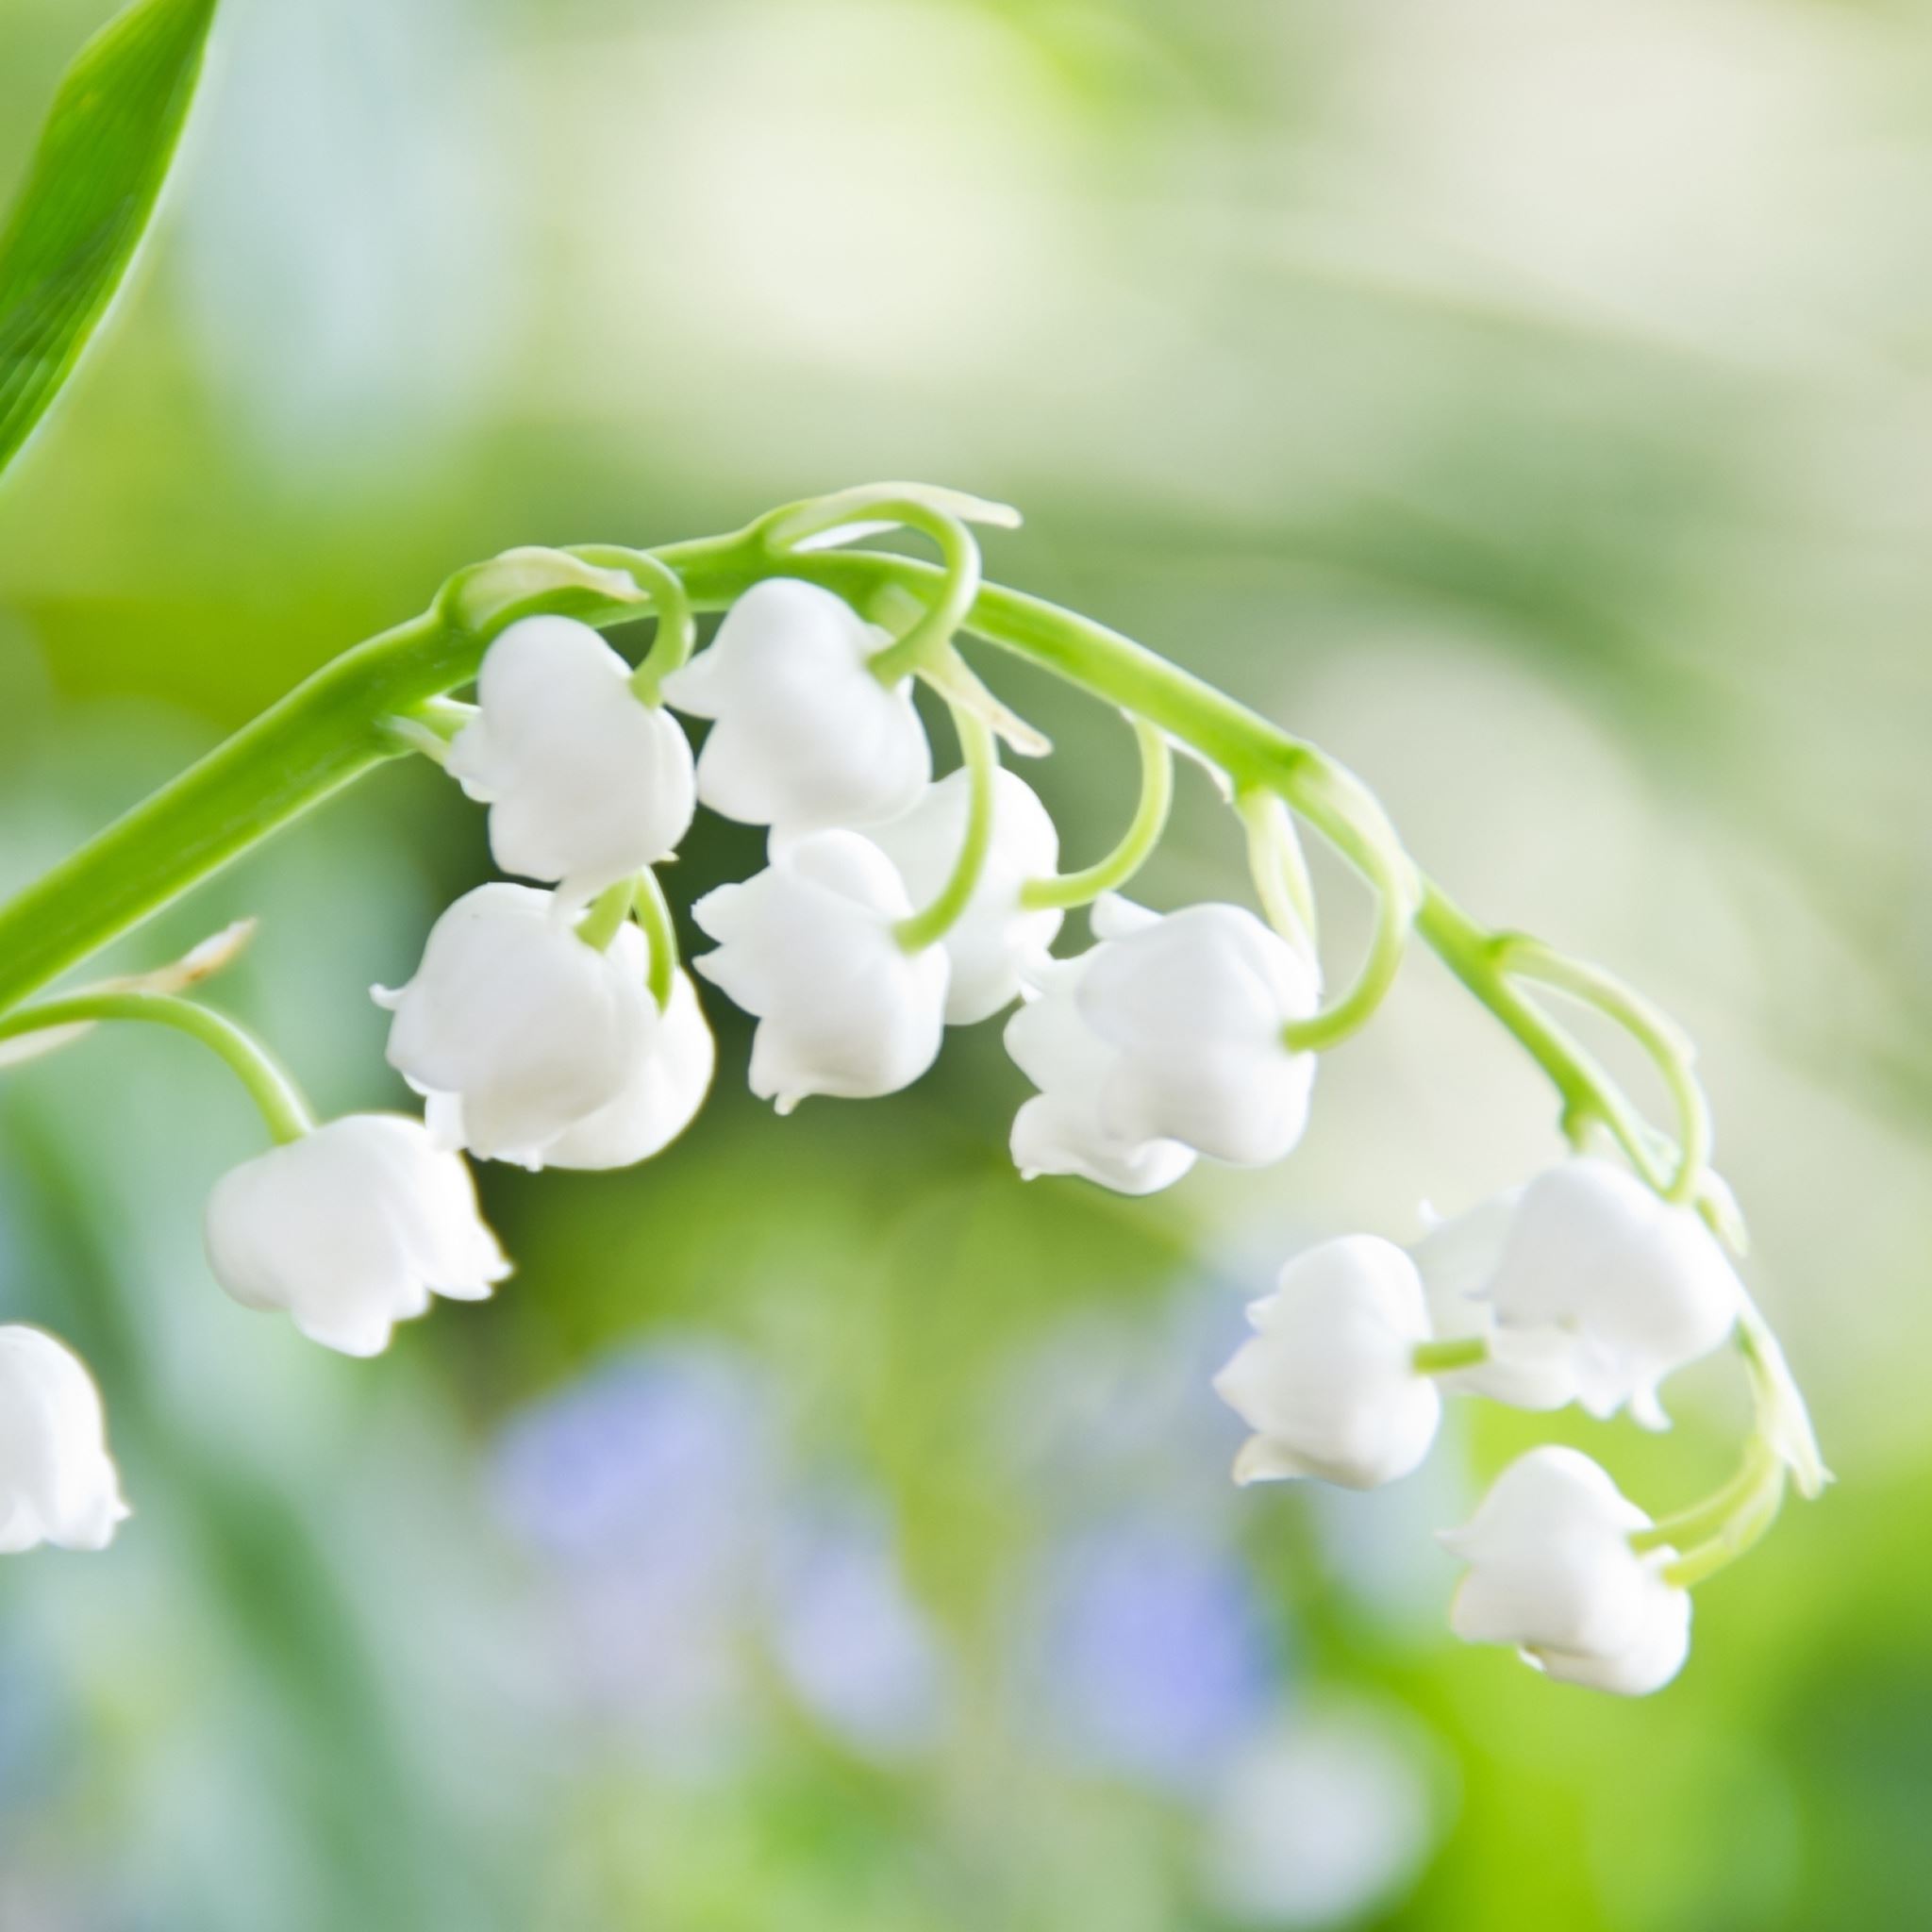 Lily of the Valley Flower Macro iPad Air wallpaper 